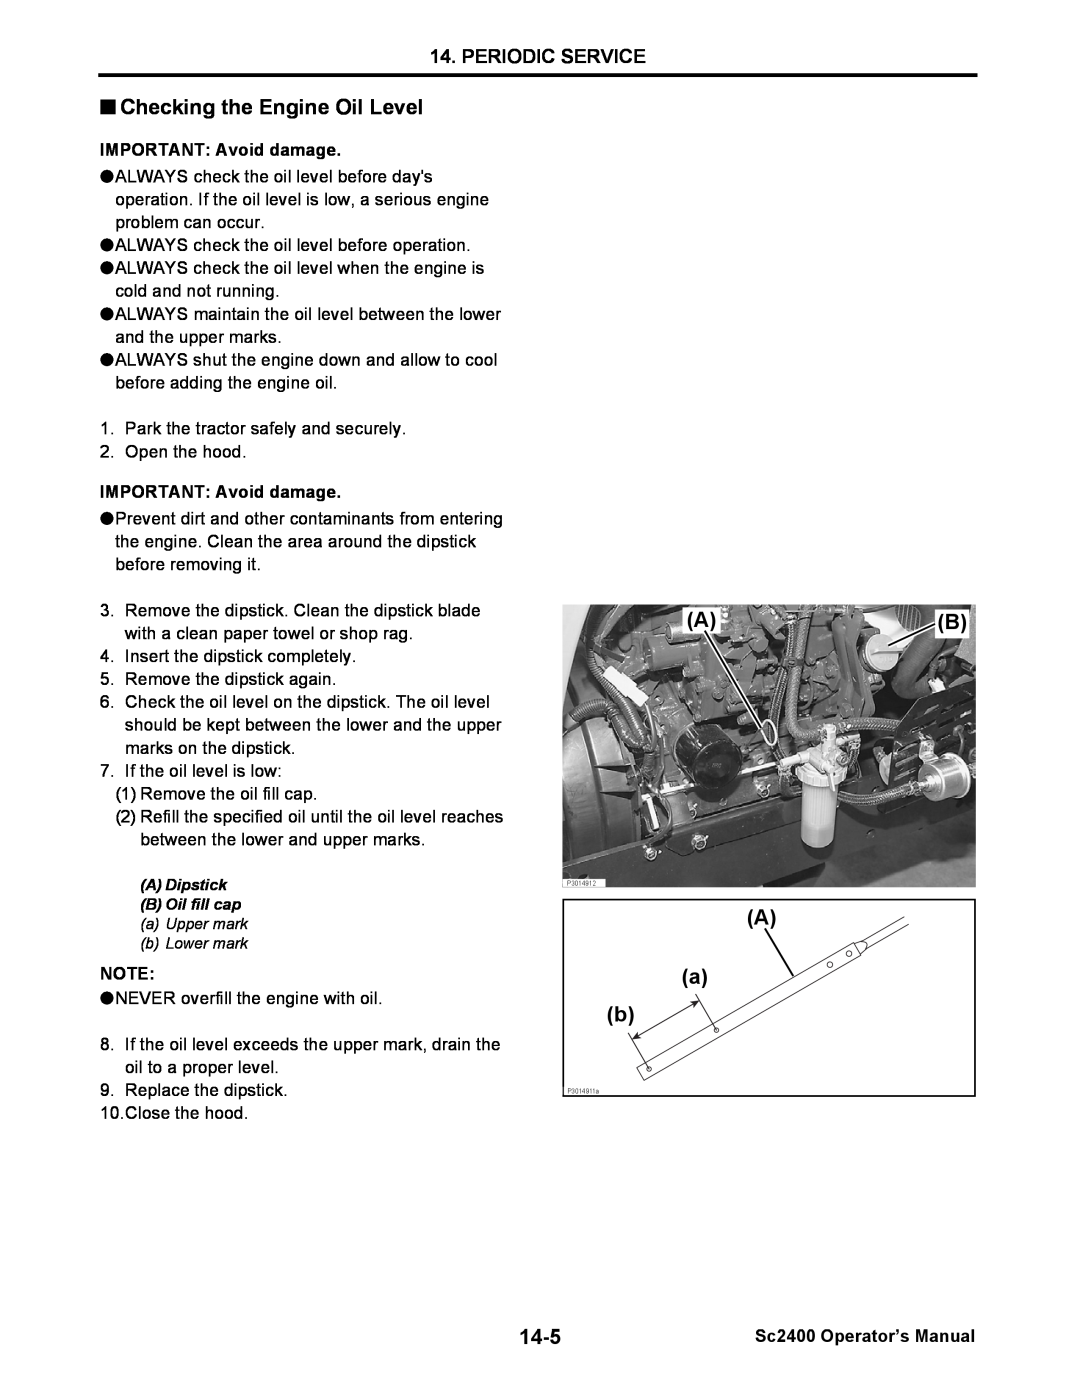 Cub Cadet SC2400 manual Checking the Engine Oil Level, A a b, 14-5, Periodic Service, IMPORTANT: Avoid damage 